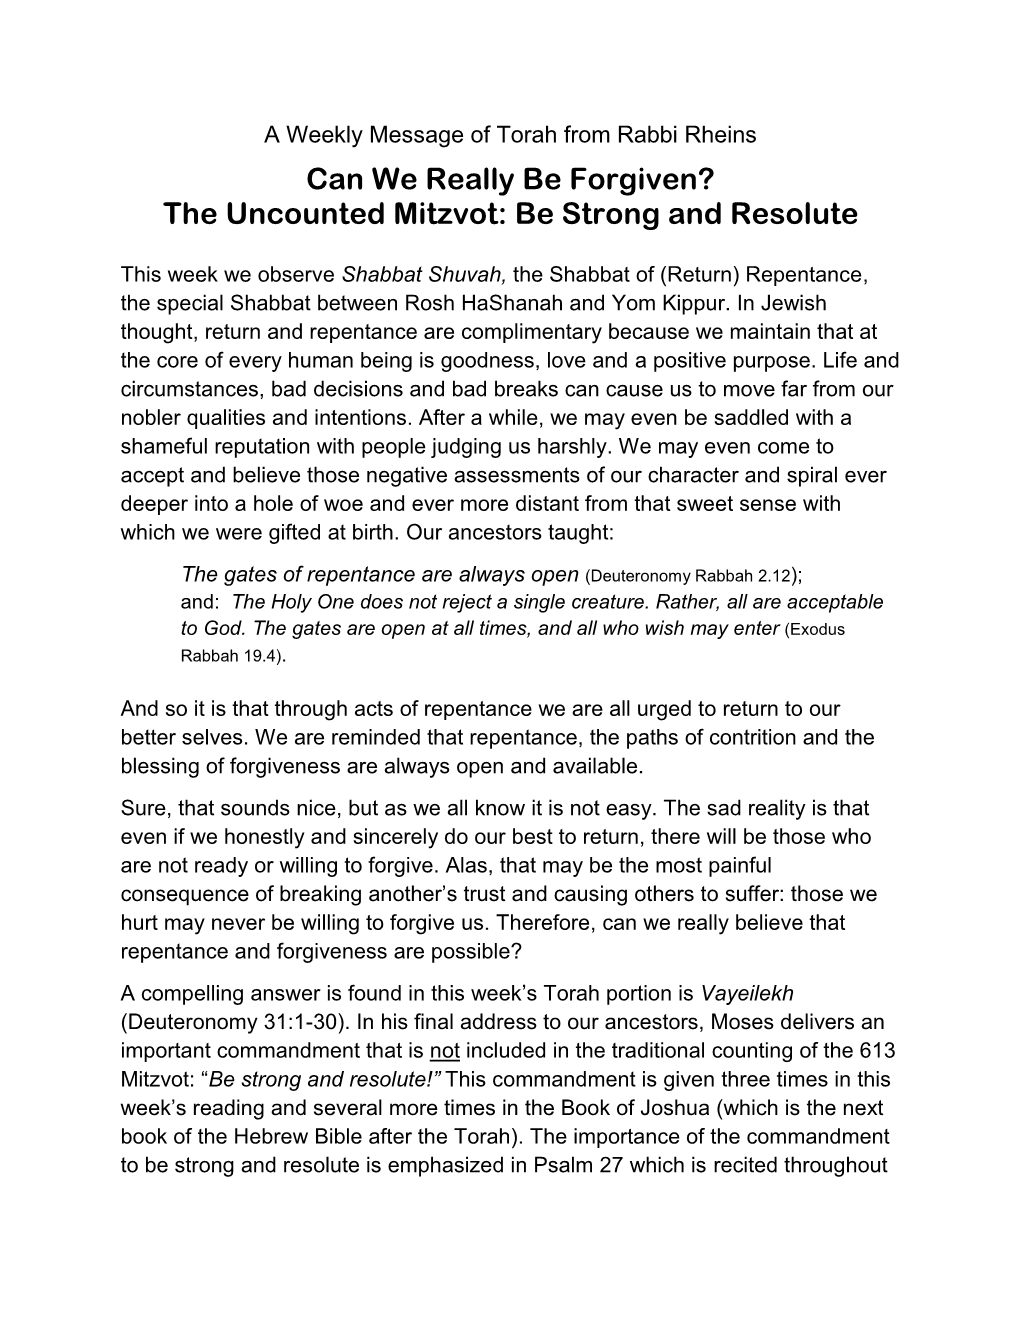 Can We Really Be Forgiven? the Uncounted Mitzvot: Be Strong and Resolute